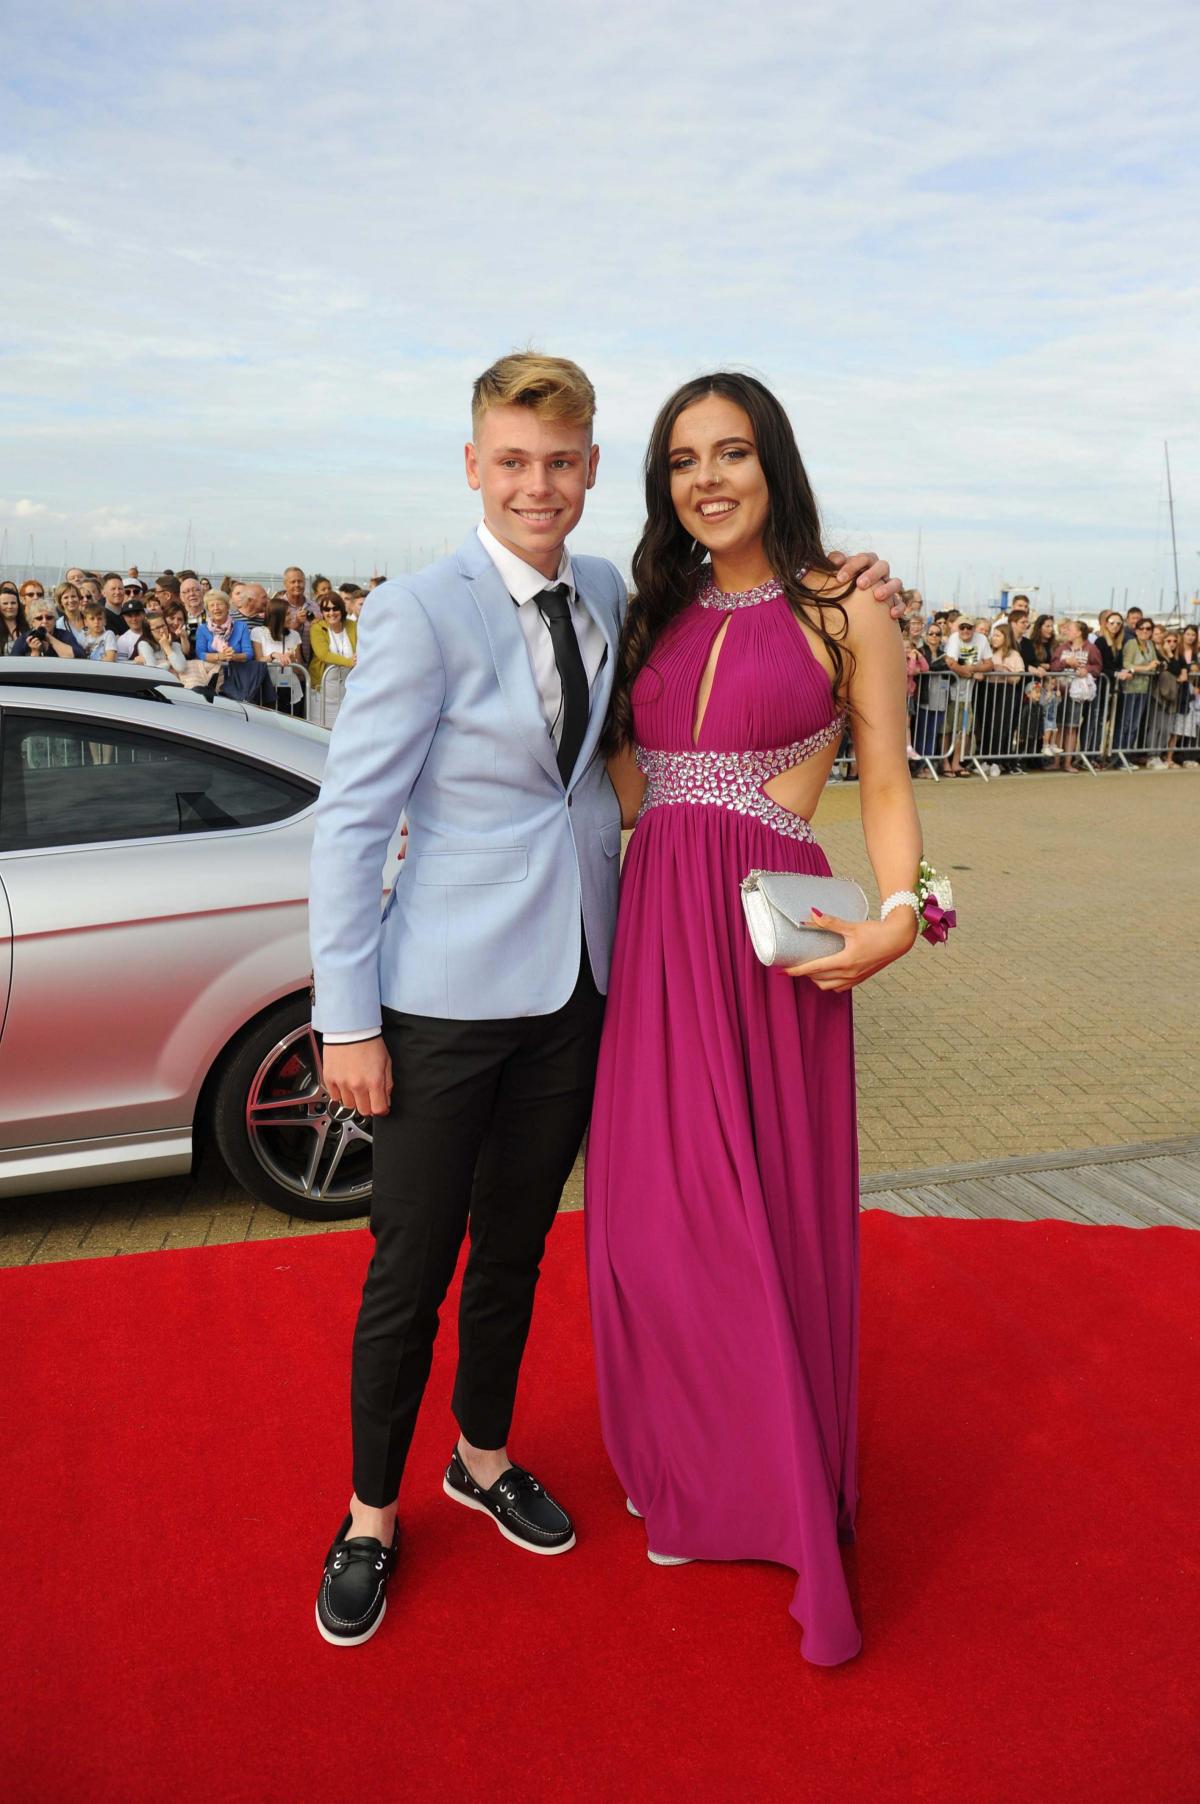 All our photos from the this year's Budmouth Year 11 Prom